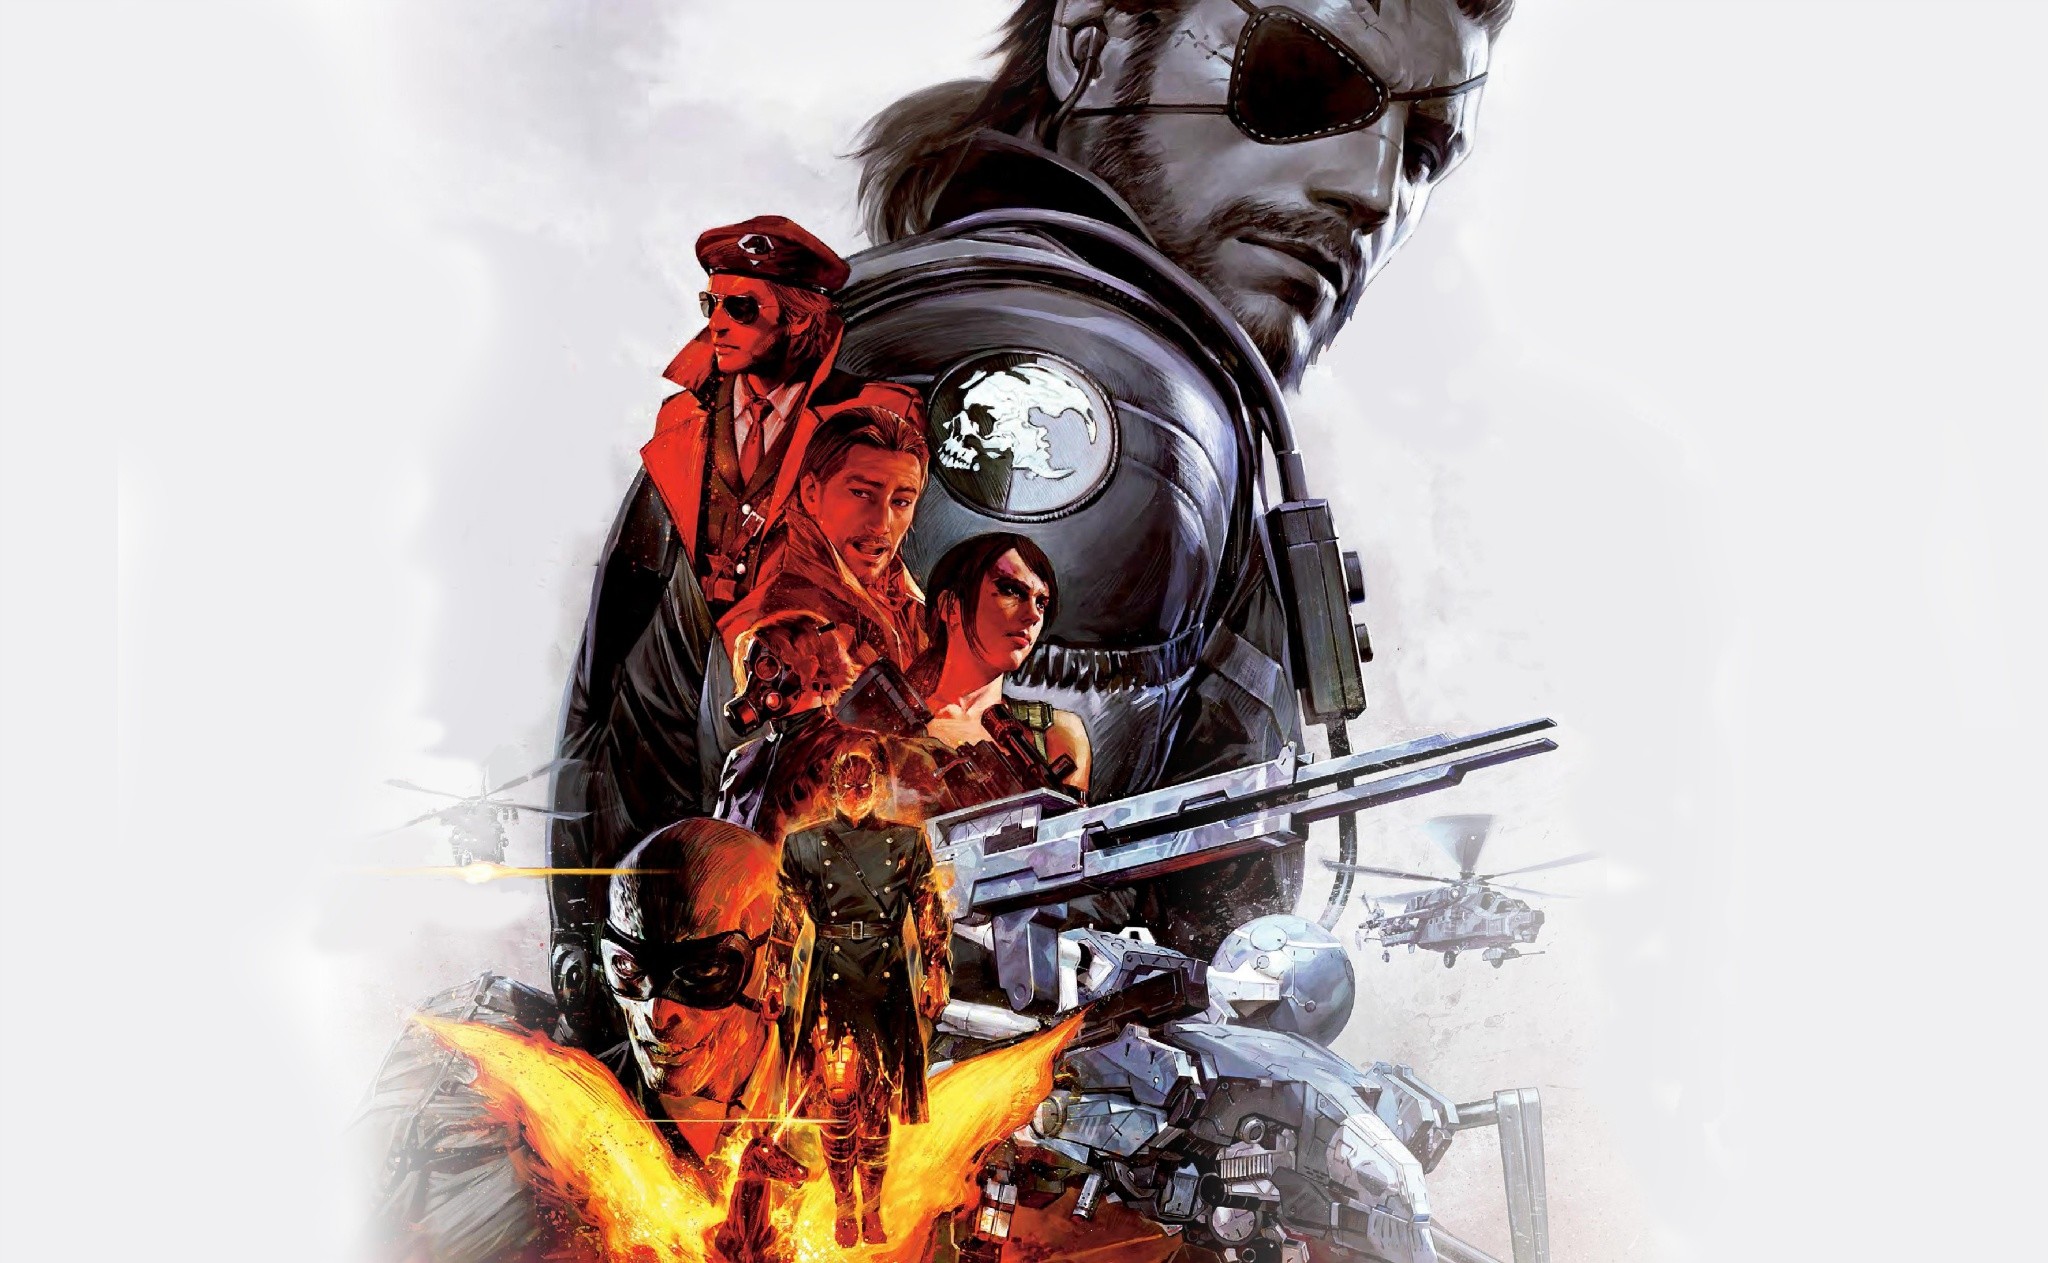 Mgs5 Phantom Pain Wallpapers (91+ images)